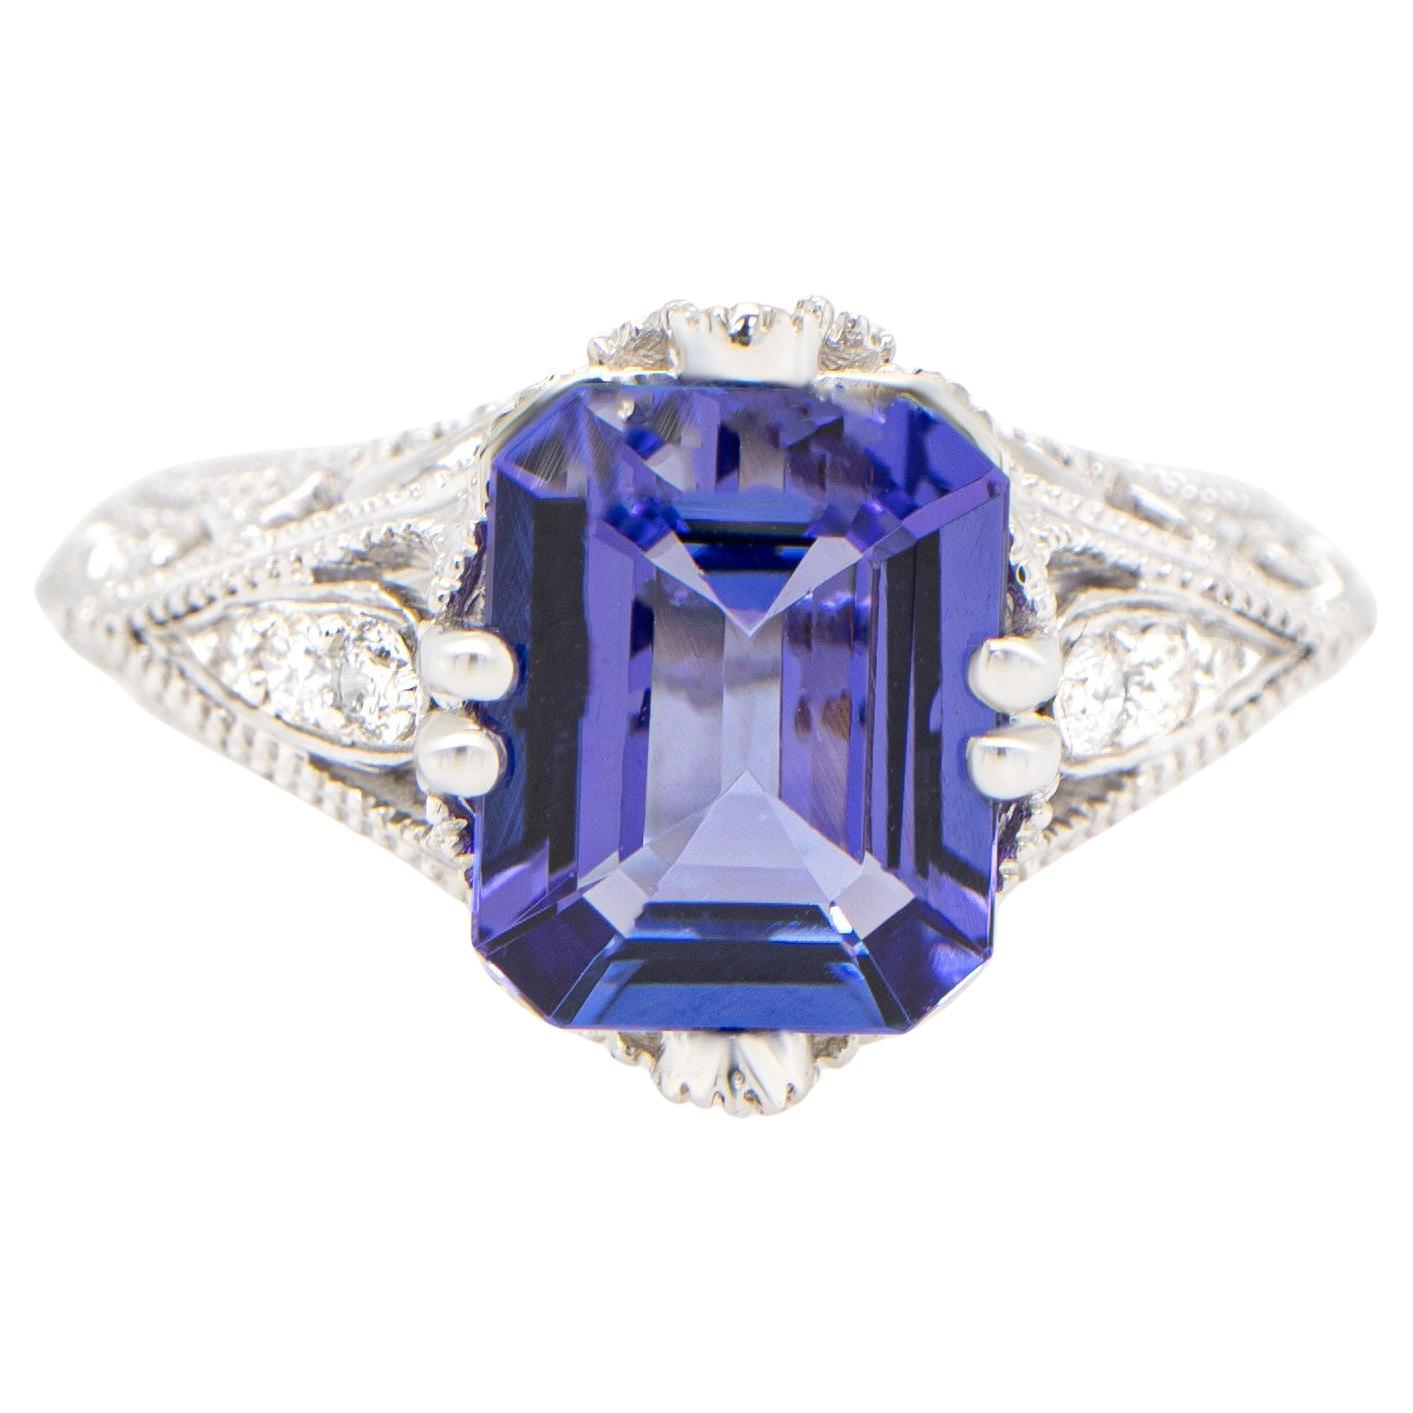 Tanzanite Ring With Diamond Setting 3.24 Carats 18K Gold For Sale